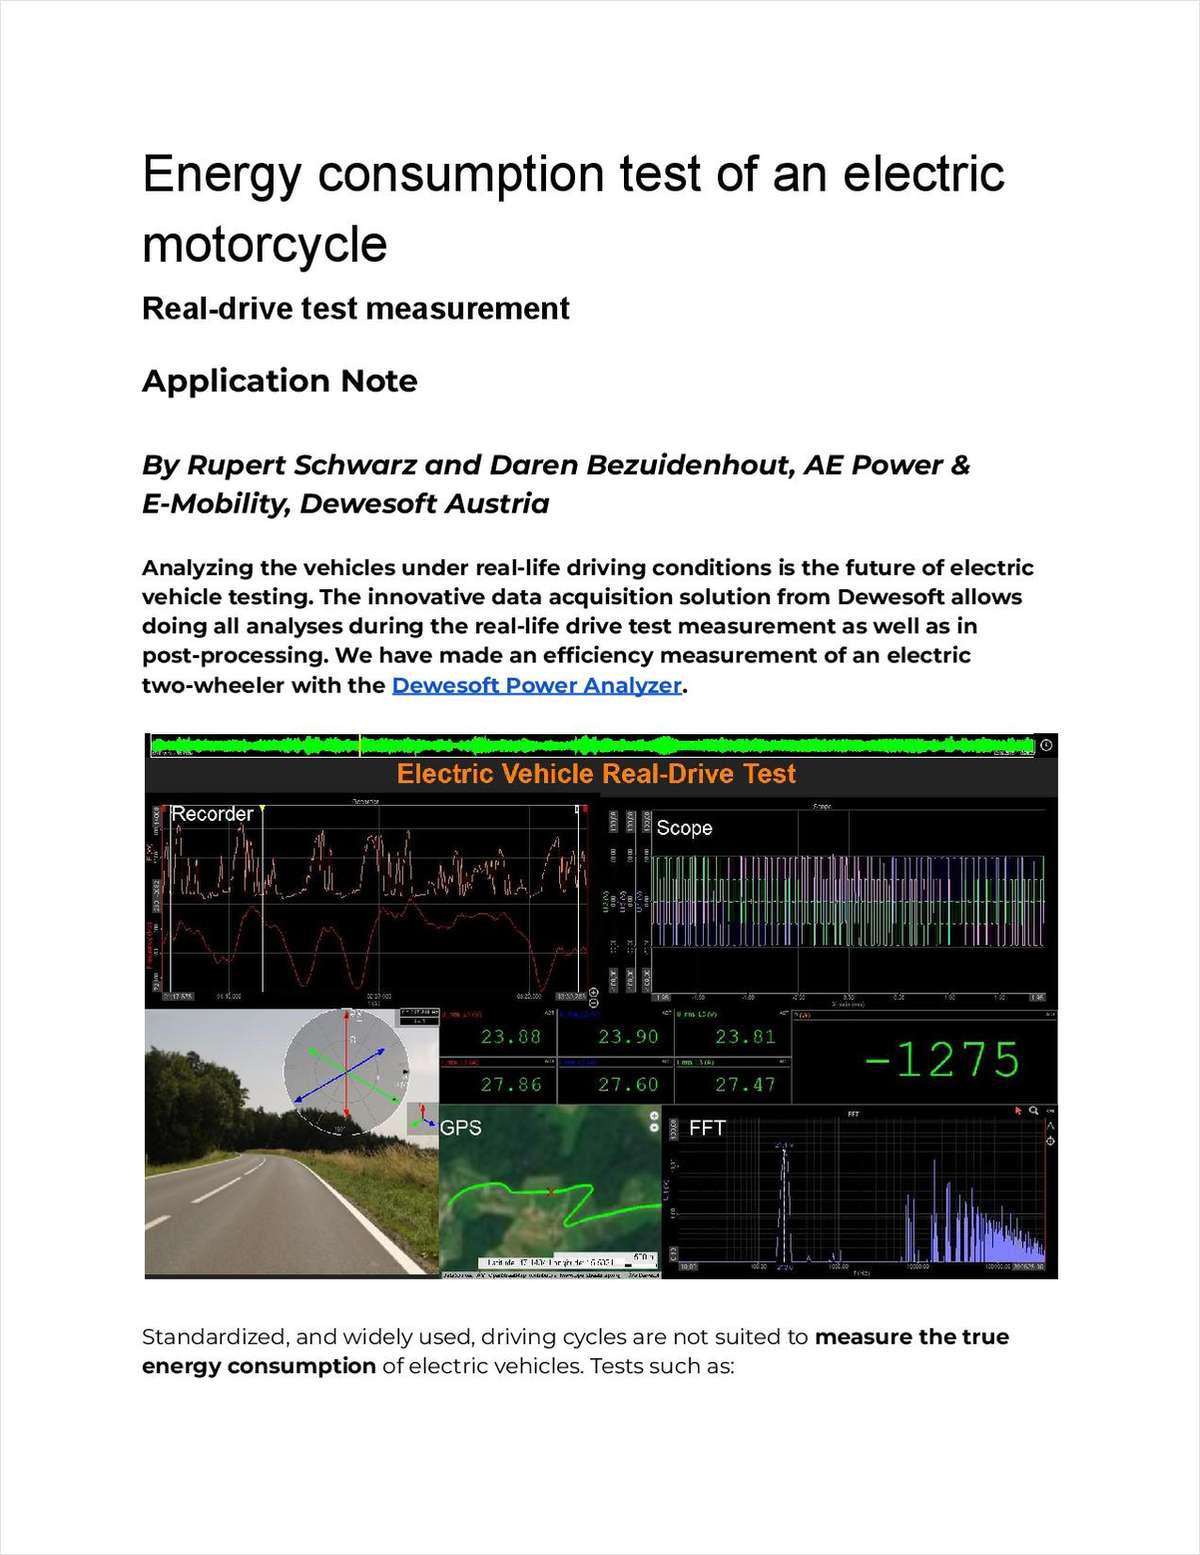 Energy Consumption Test of an Electric Motorcycle